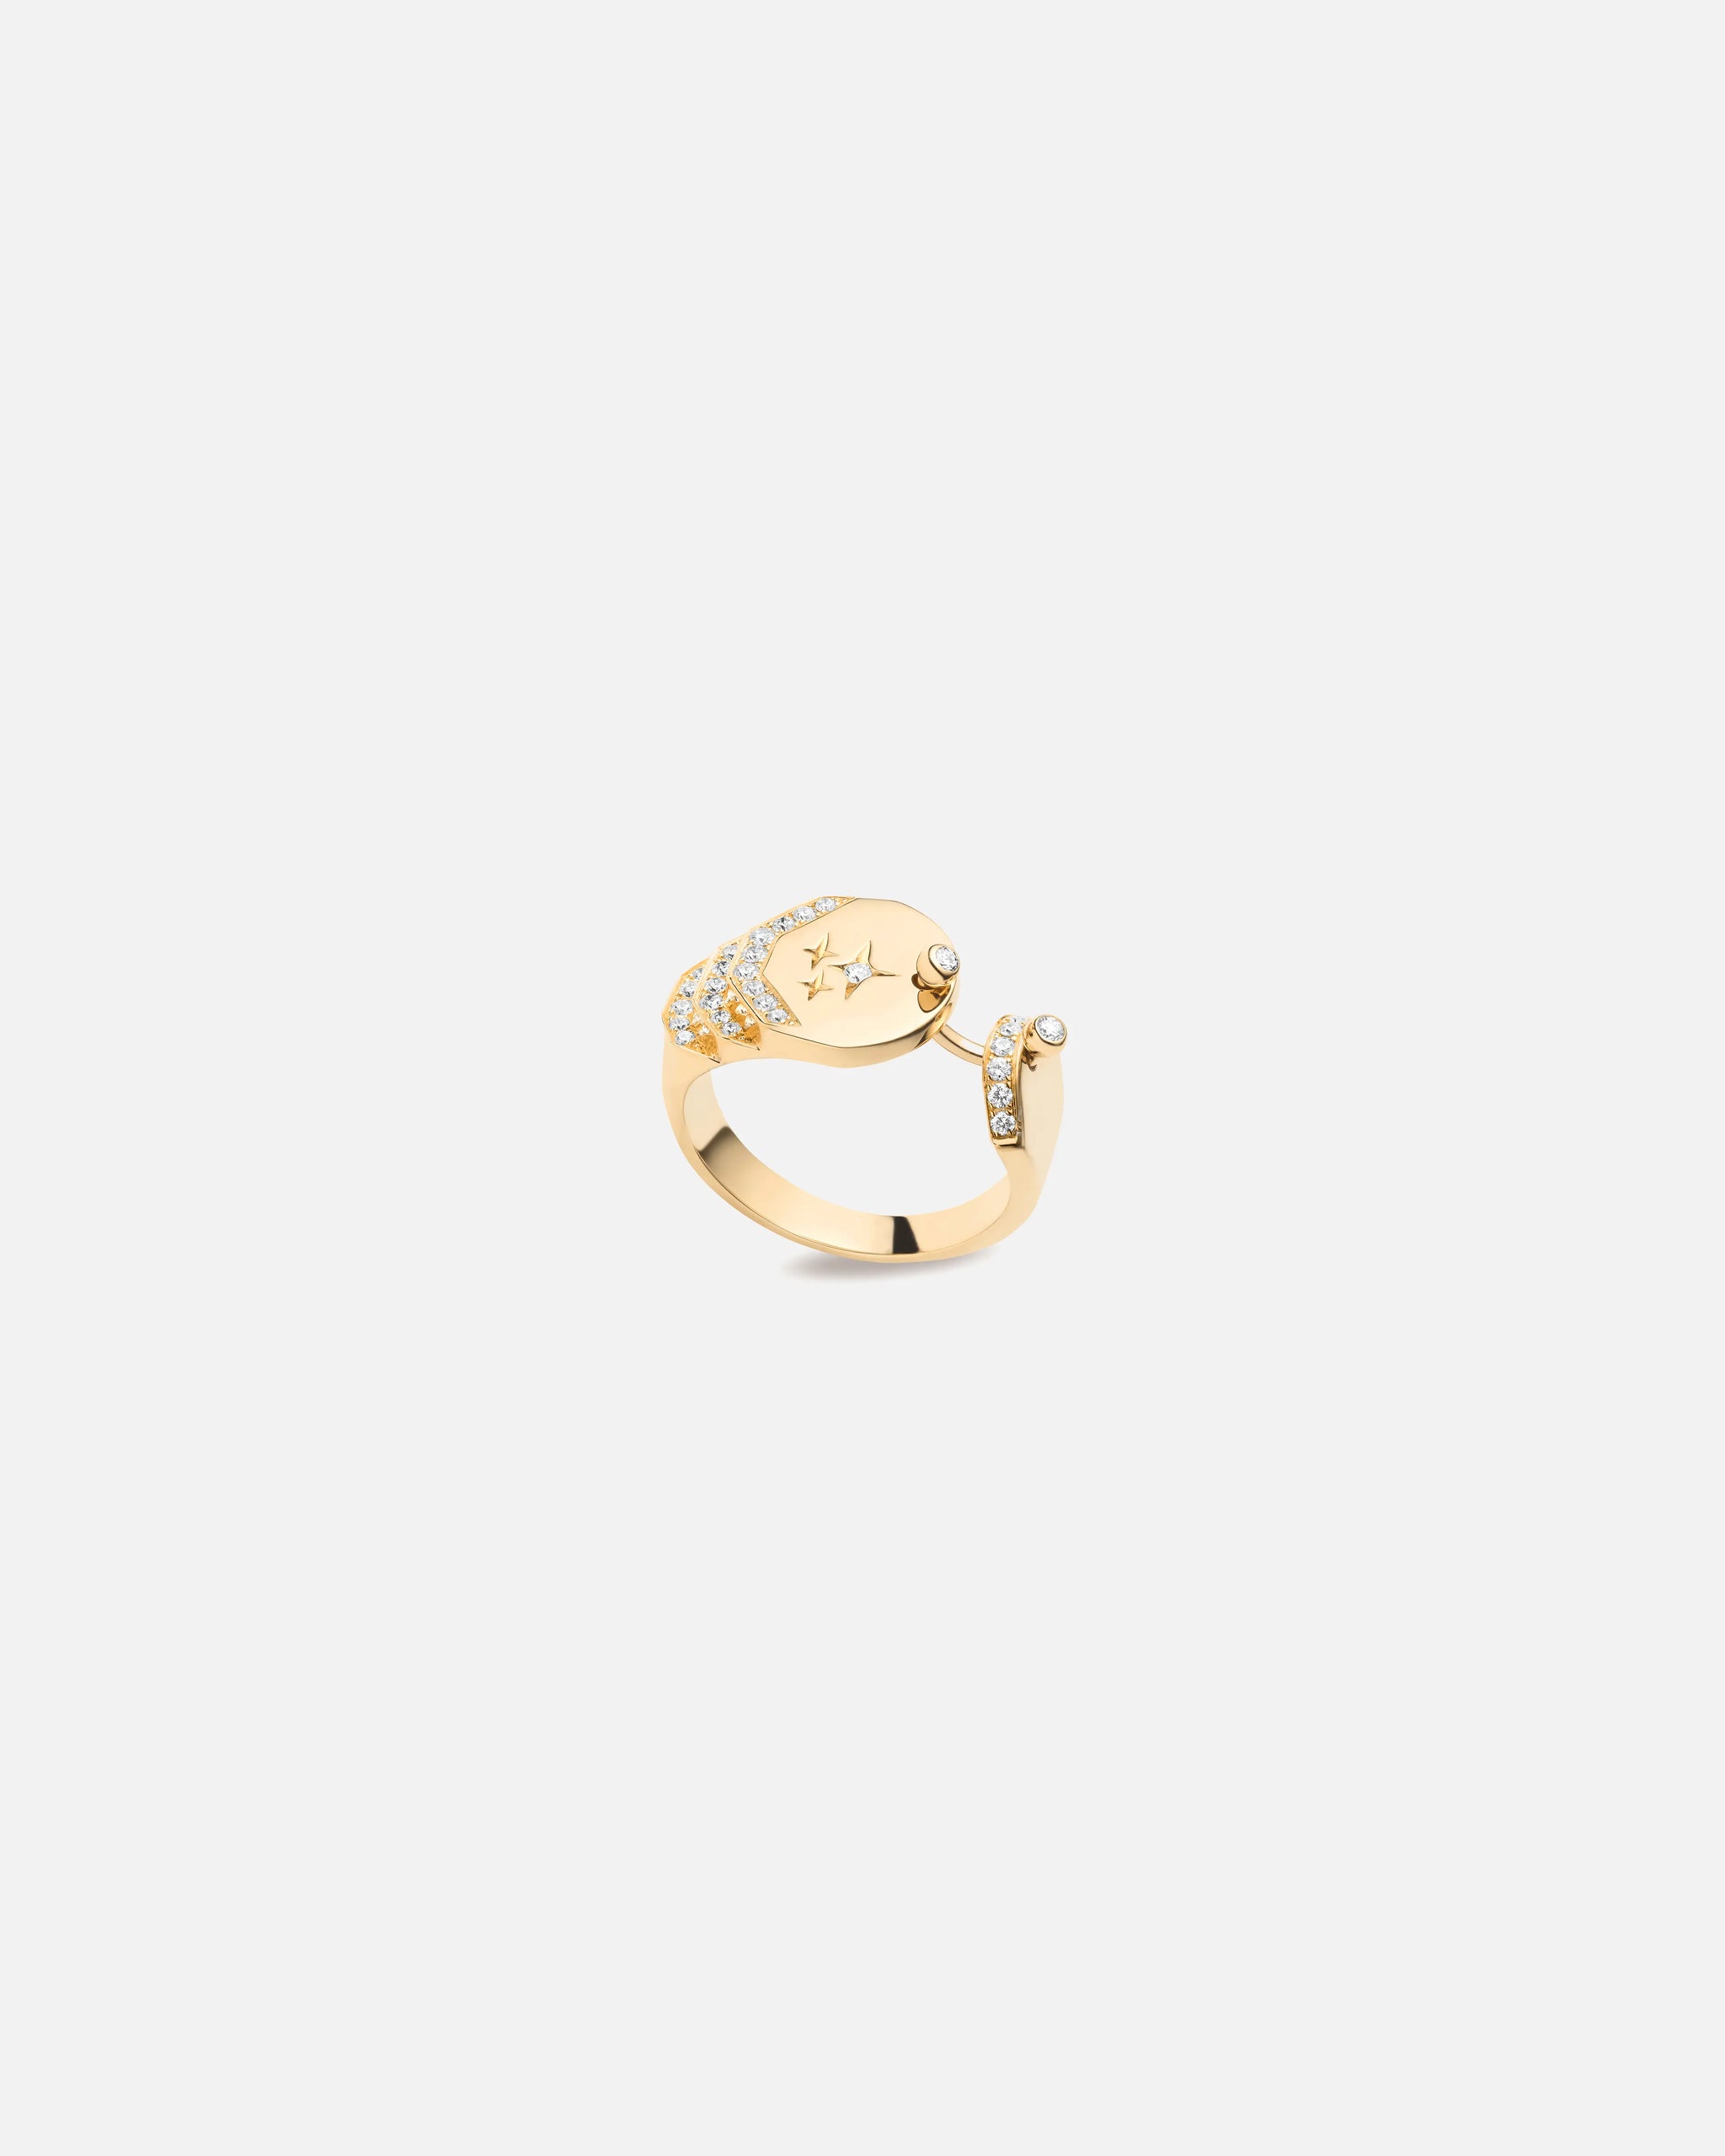 Diamond Mood Sparkles Ring in Yellow Gold - Nouvel Heritage - Nouvel Heritage